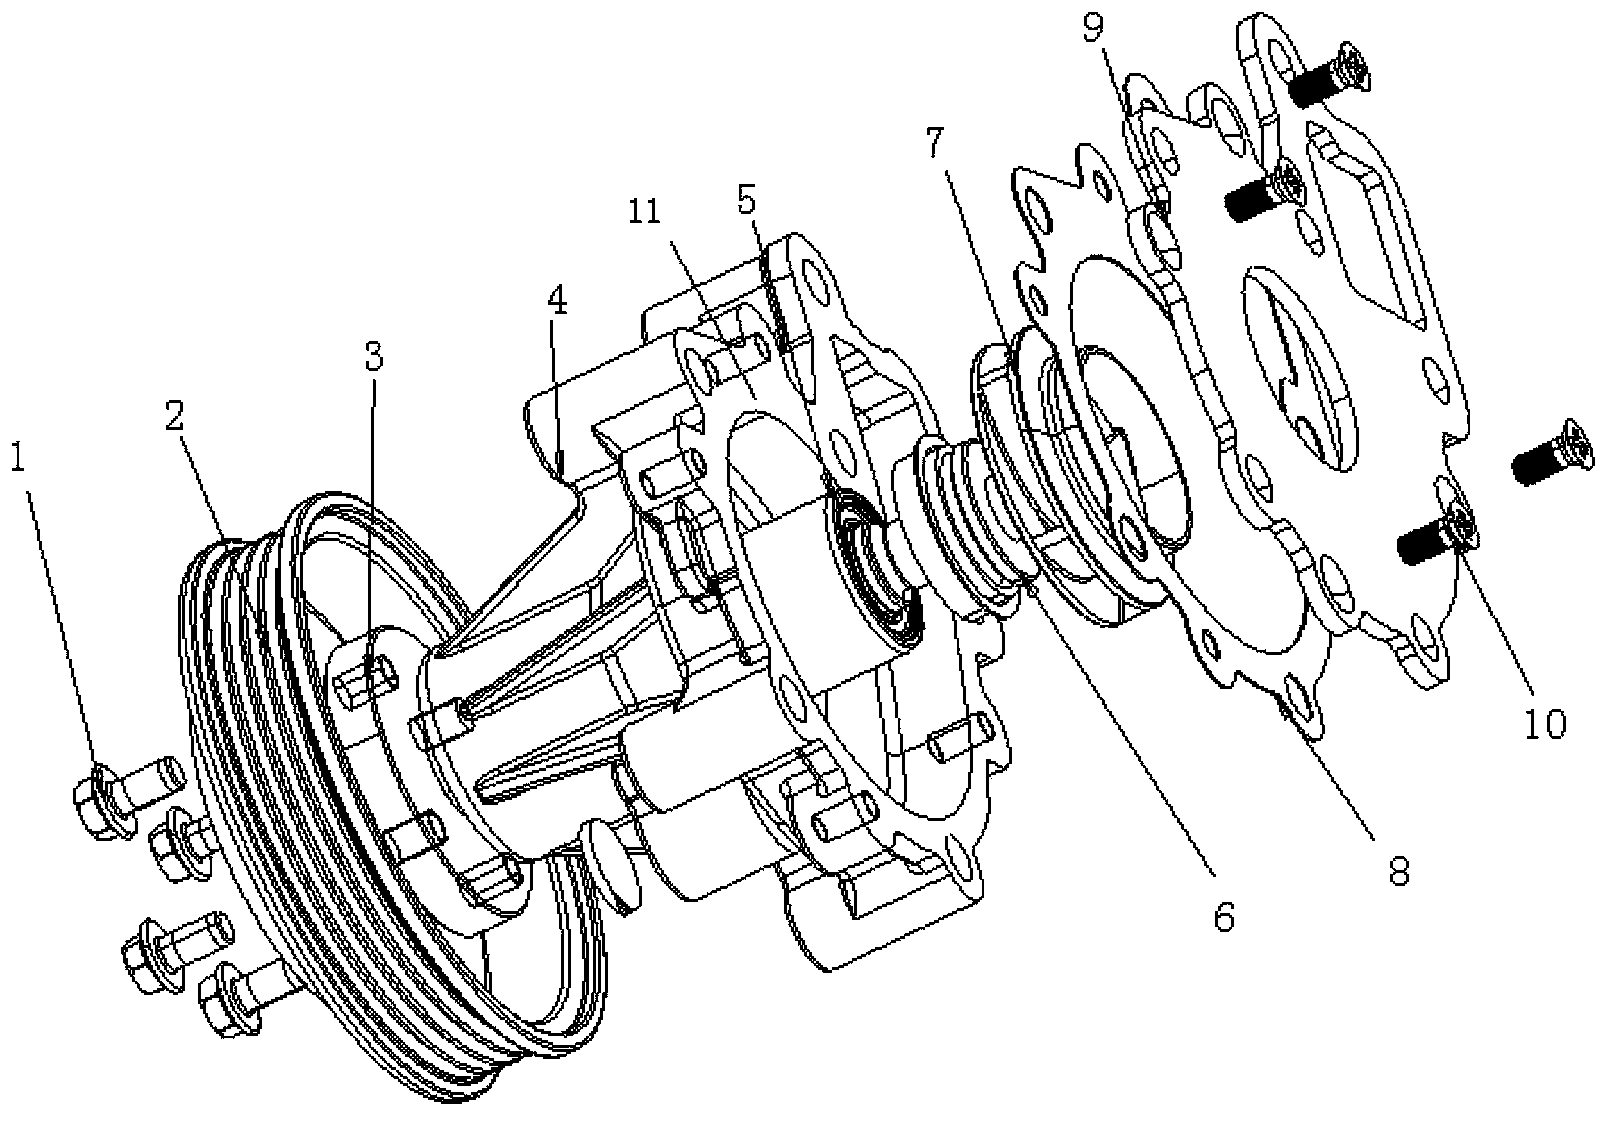 Water pump assembly used for diesel engines